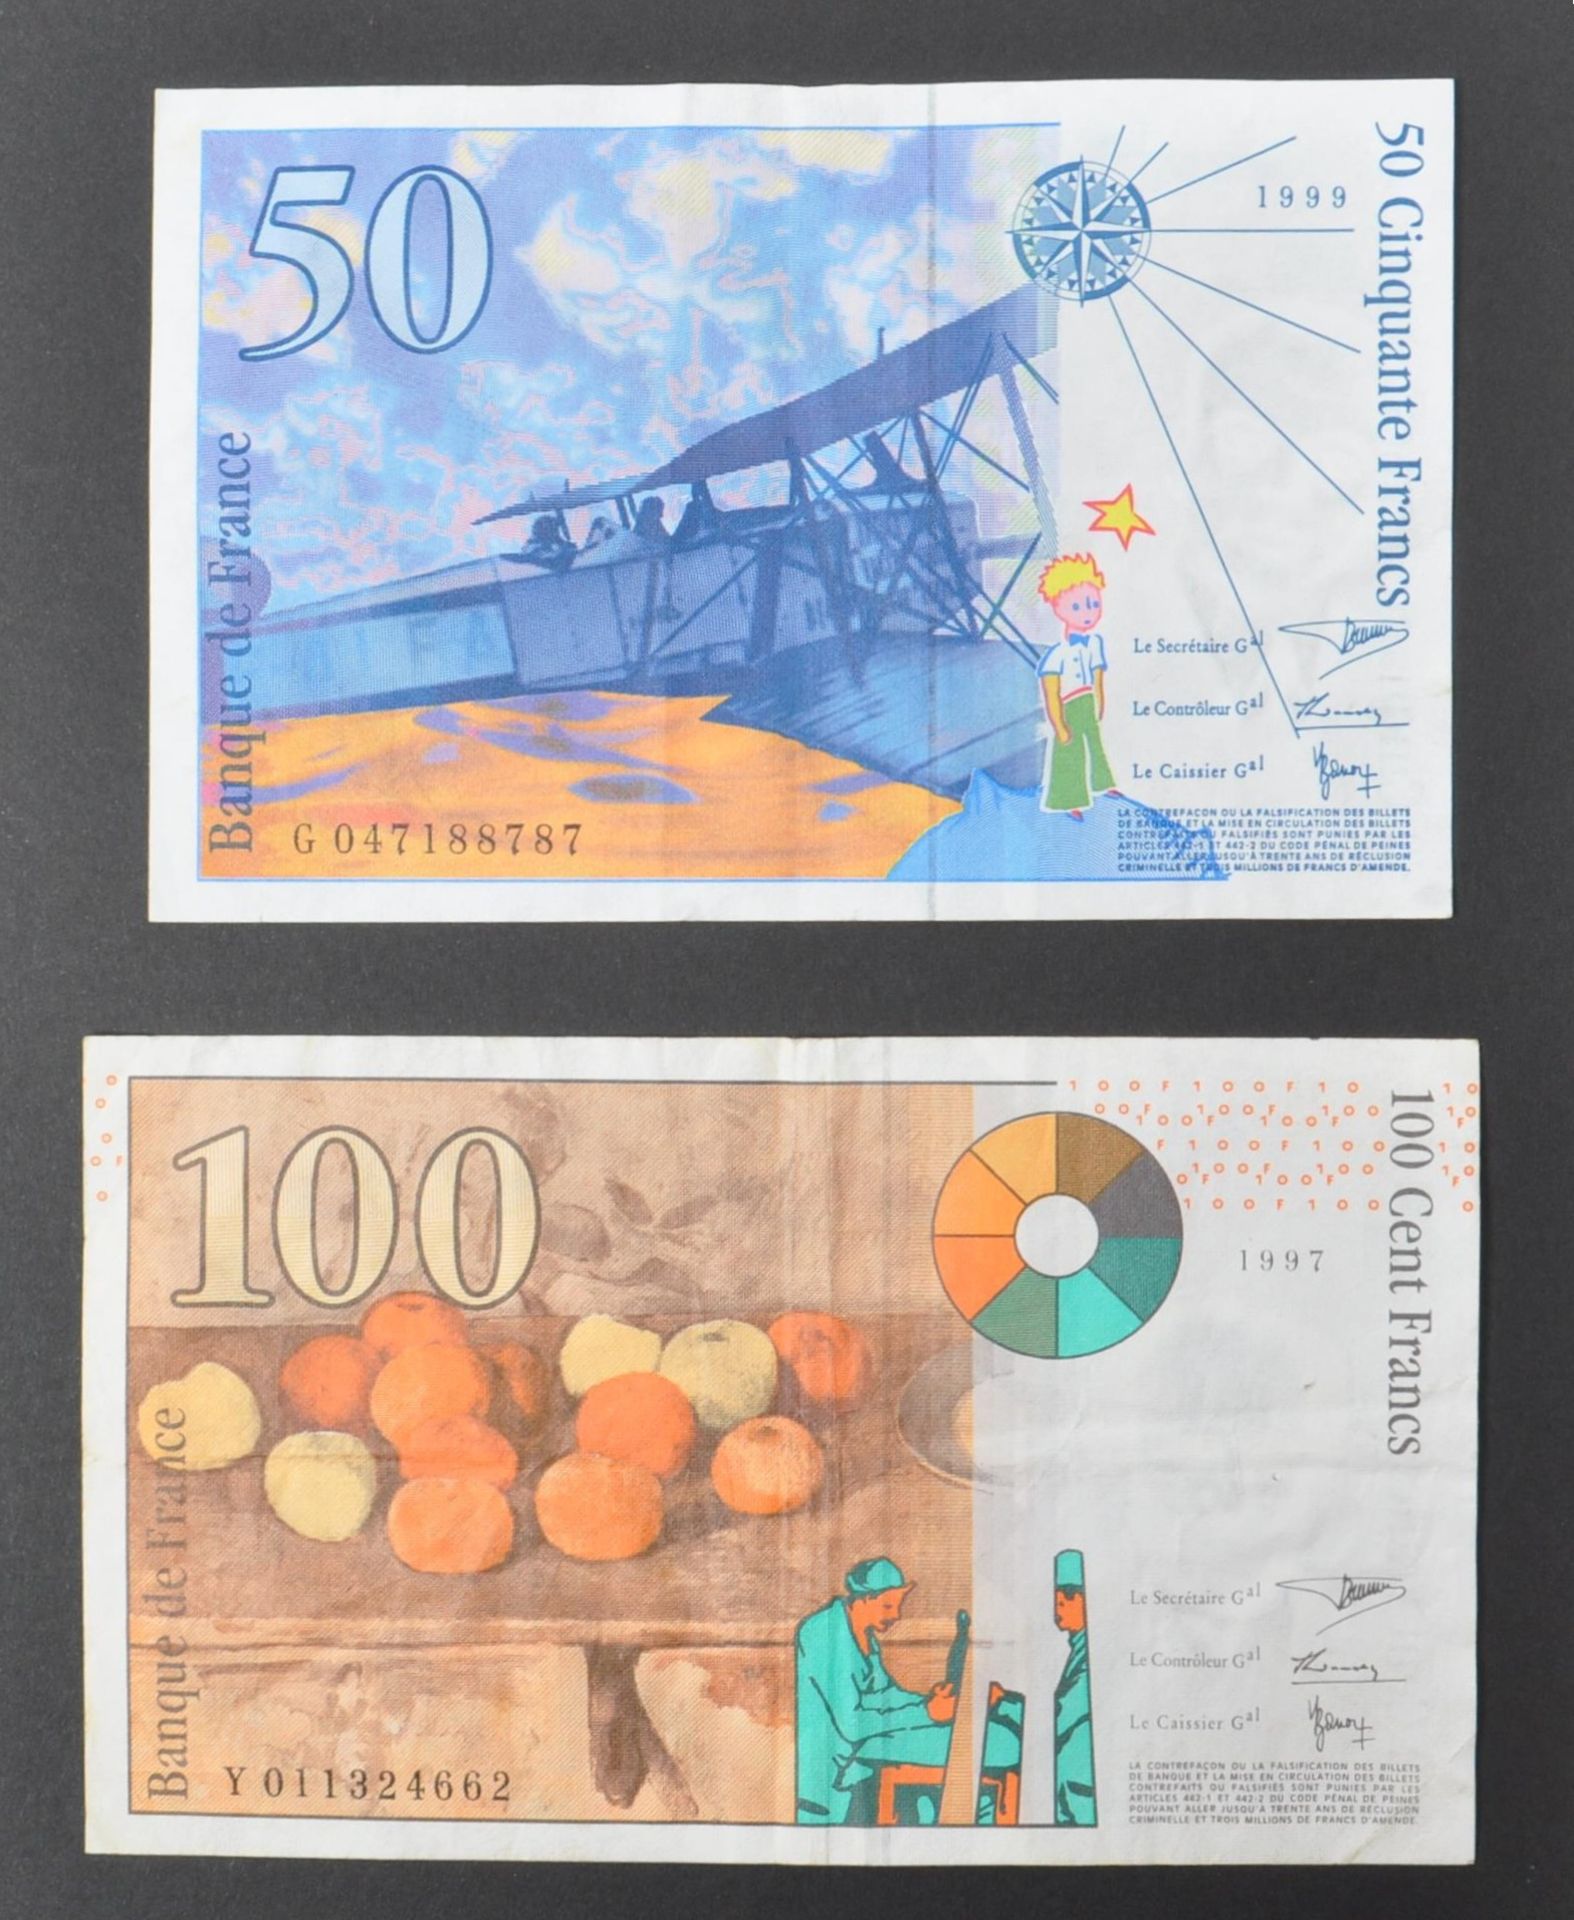 INTERNATIONAL MOSTLY UNCIRCULATED BANK NOTES - EUROPE - Image 10 of 30